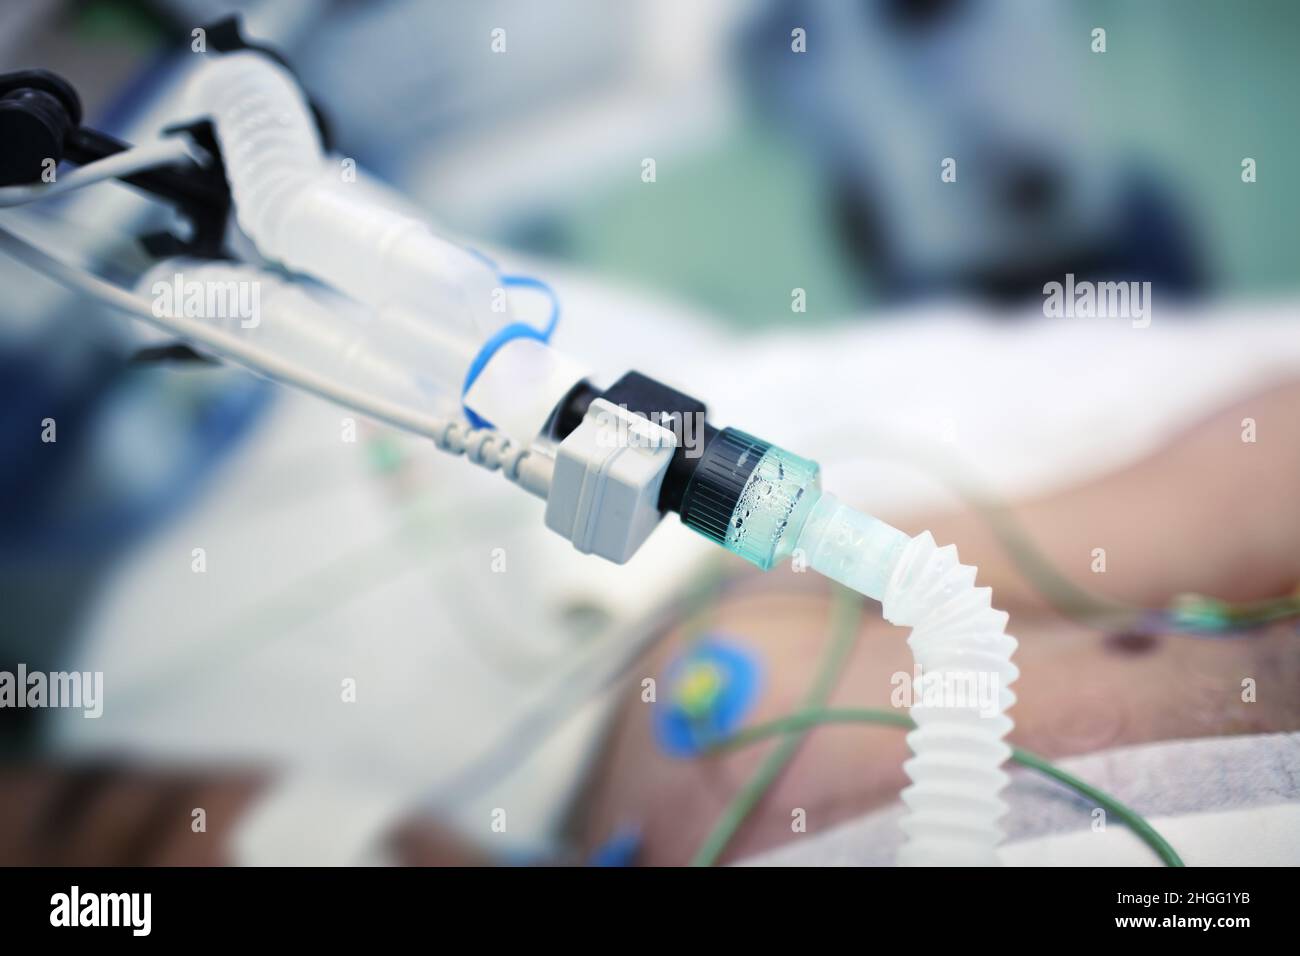 Artificial lung ventilation tube connected to the patient in the bed. Stock Photo